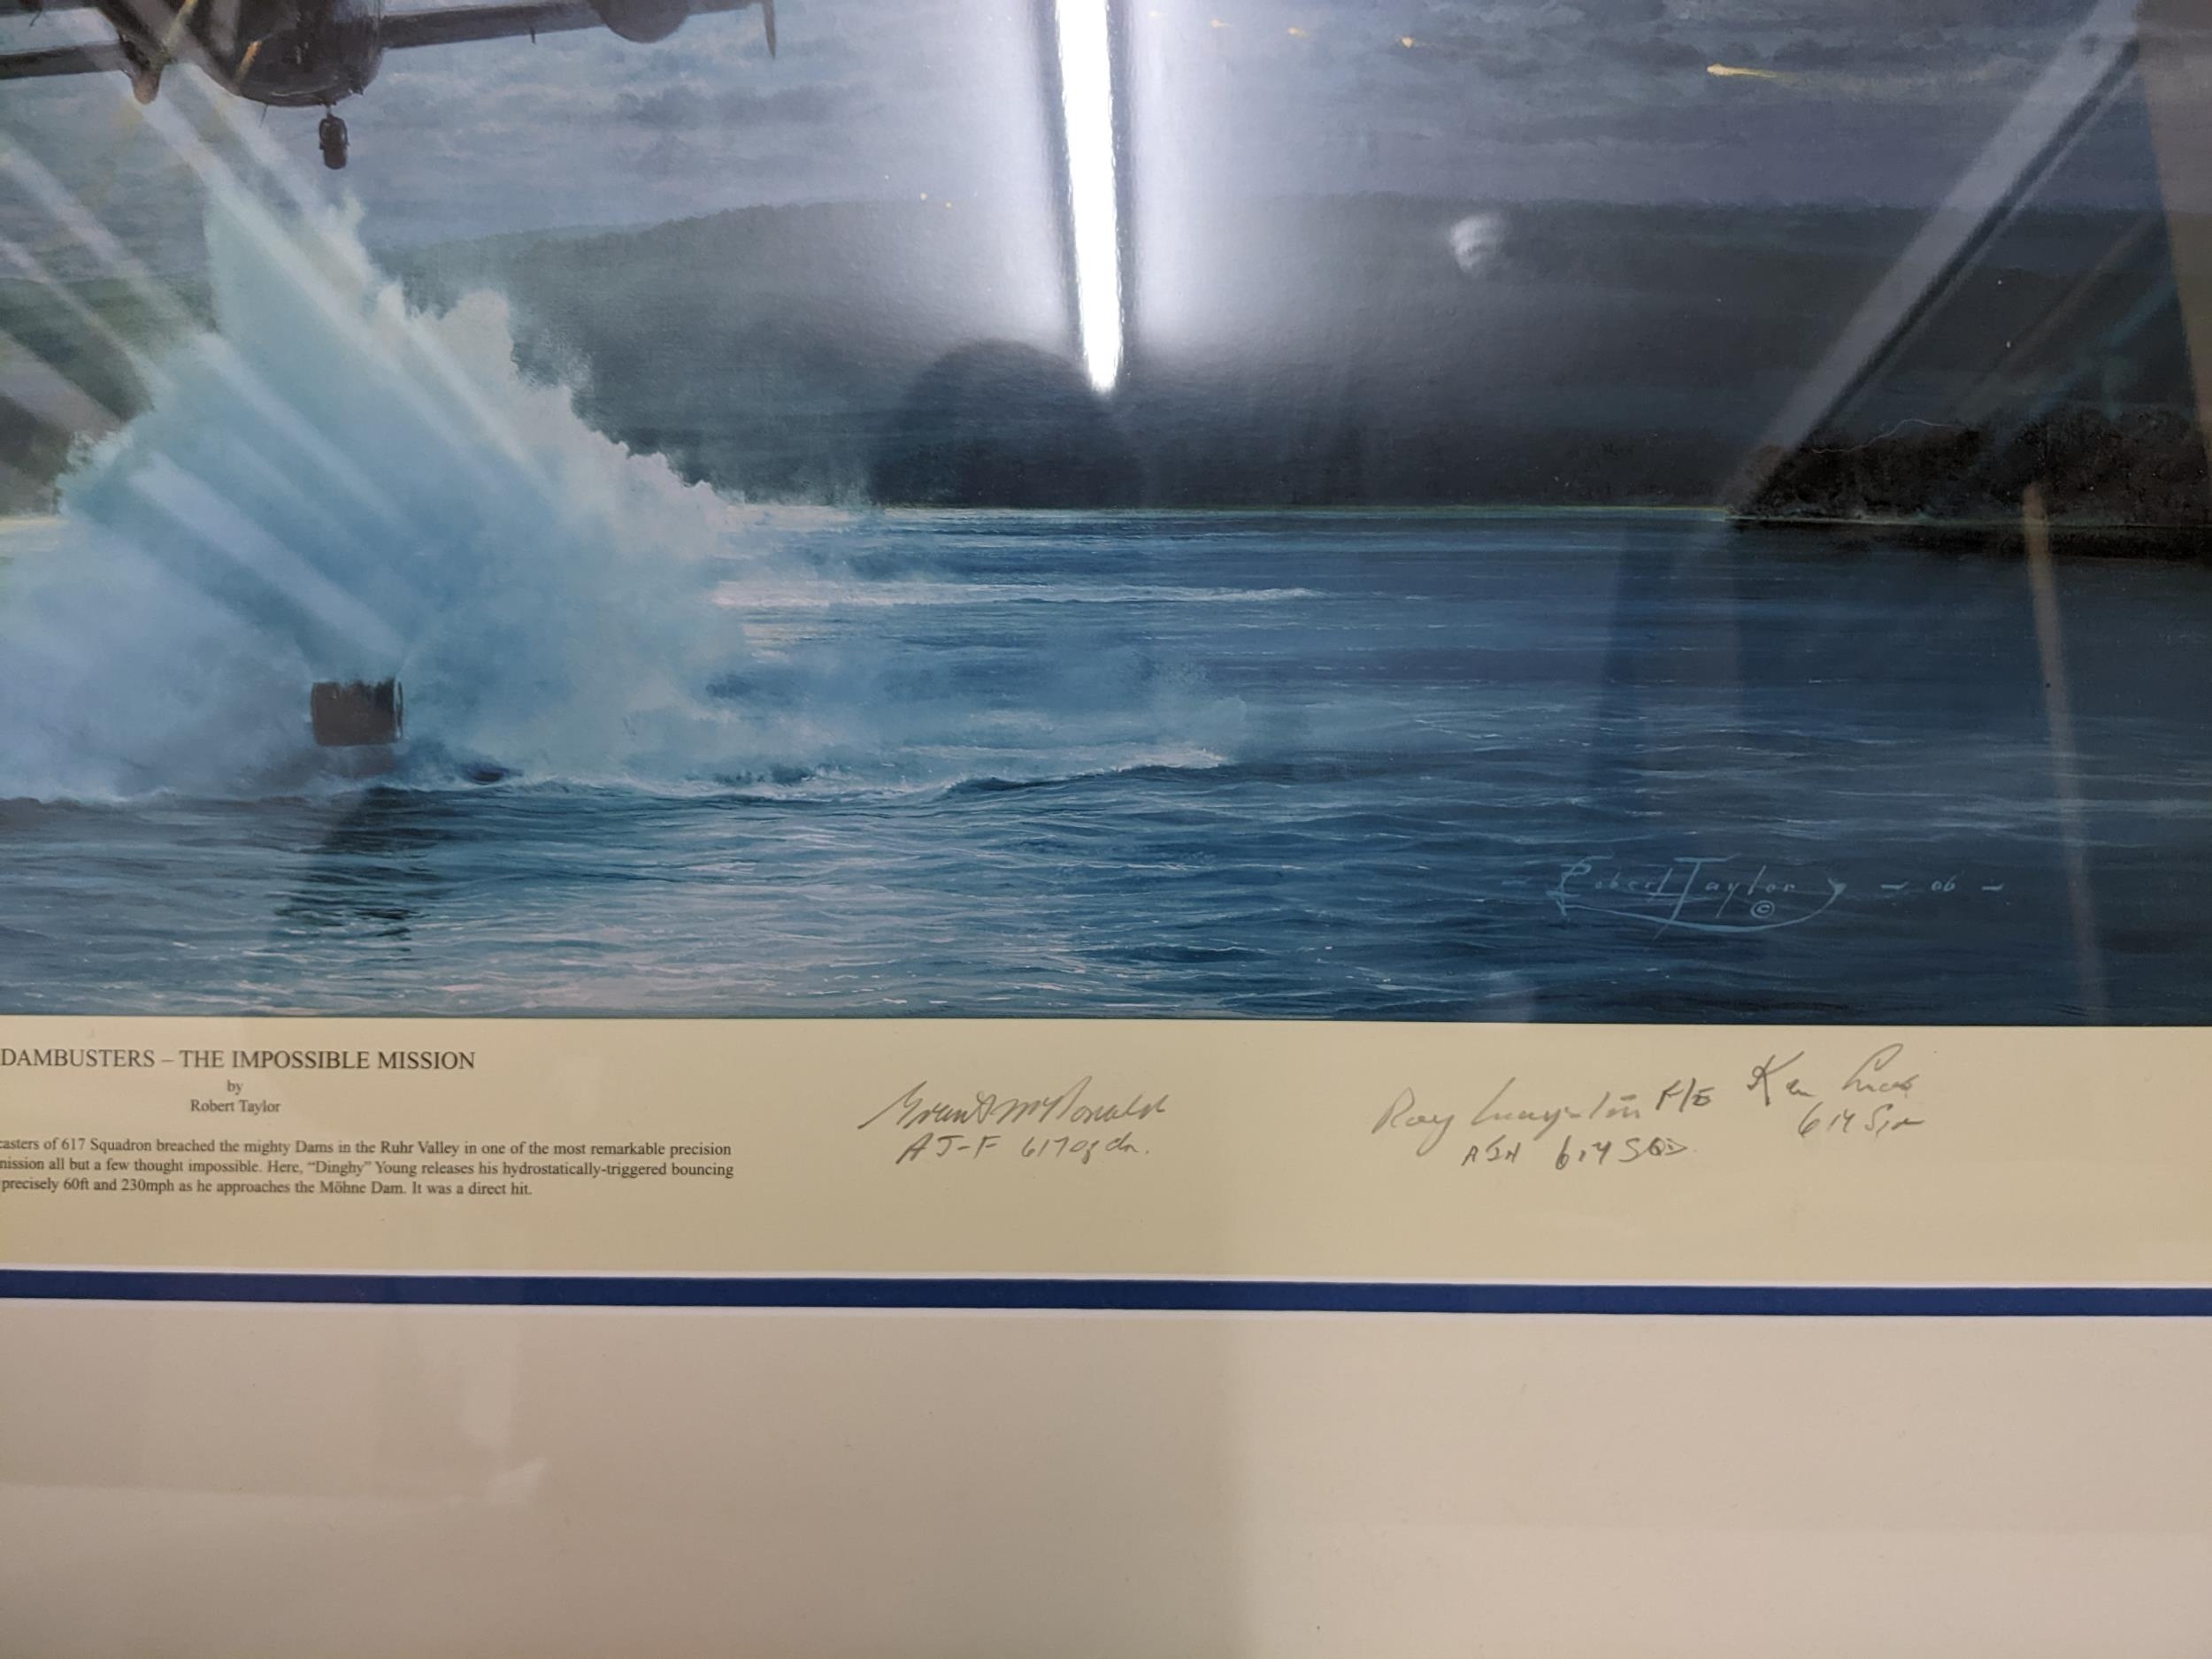 Robert Taylor -Dambusters - The Impossible Mission, the collectors edition, a limited edition - Image 3 of 4